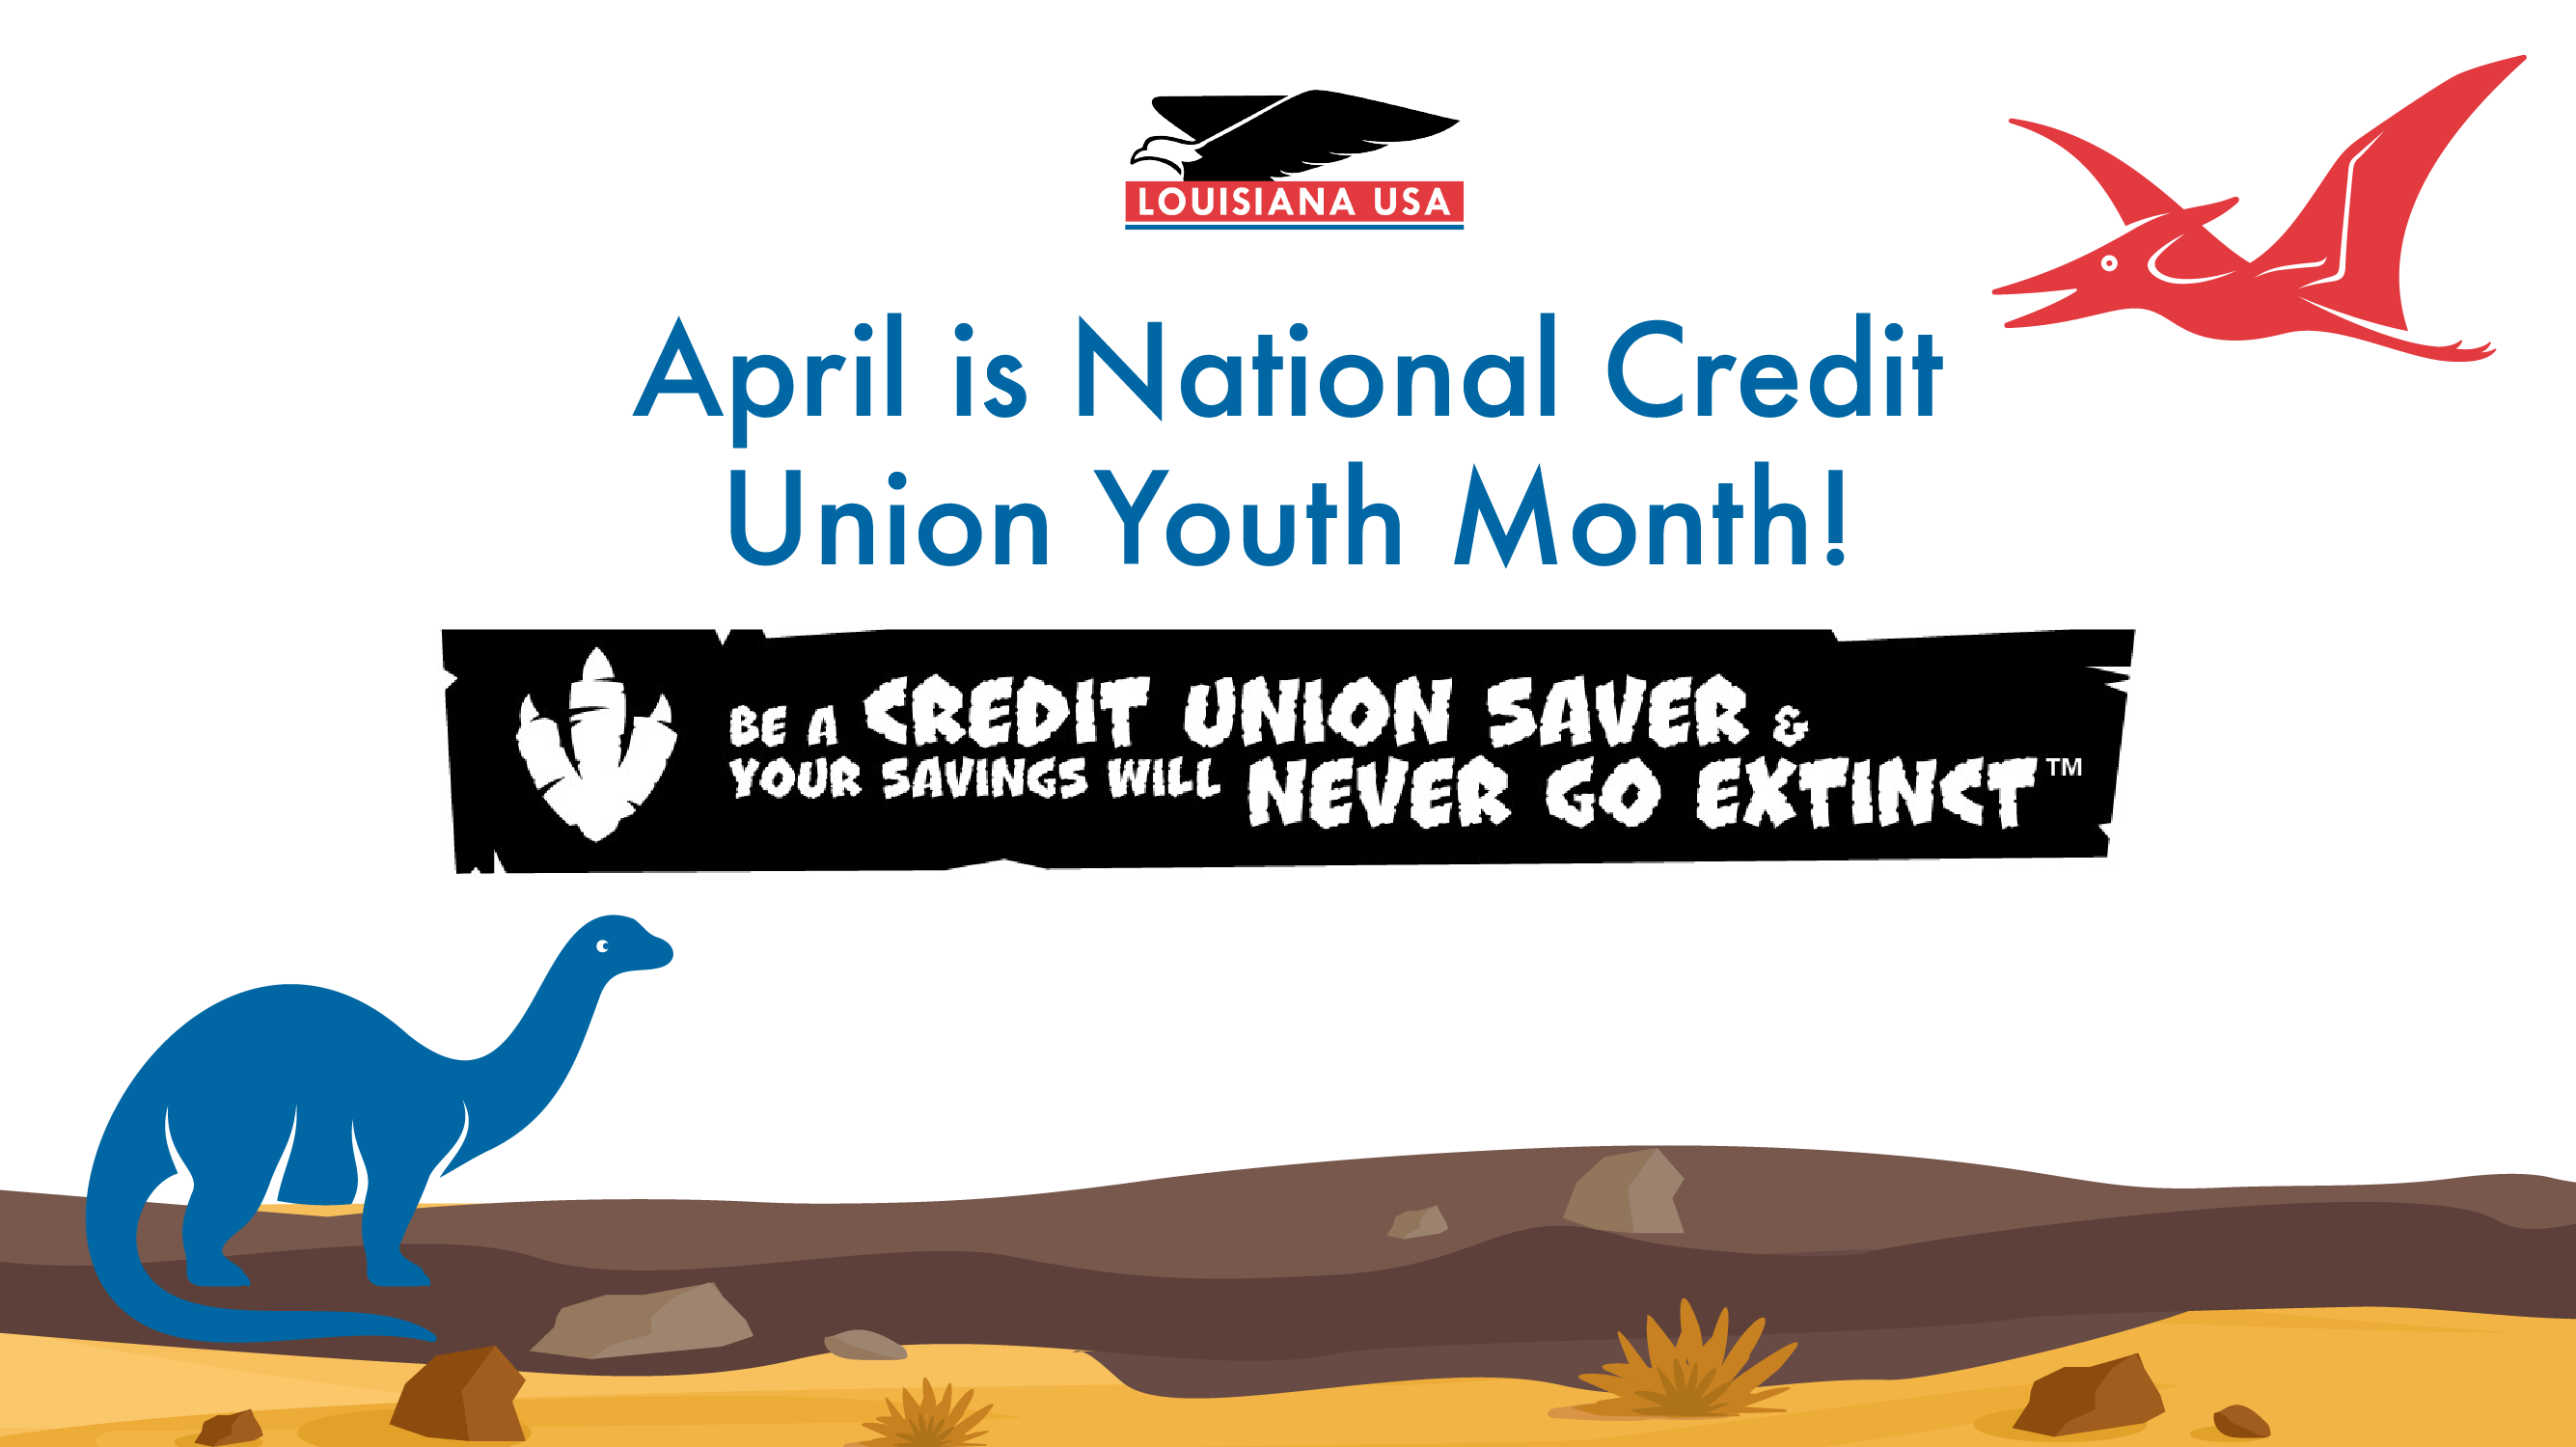 Be A Credit Union Saver And Your Savings Will Never Go Extinct!